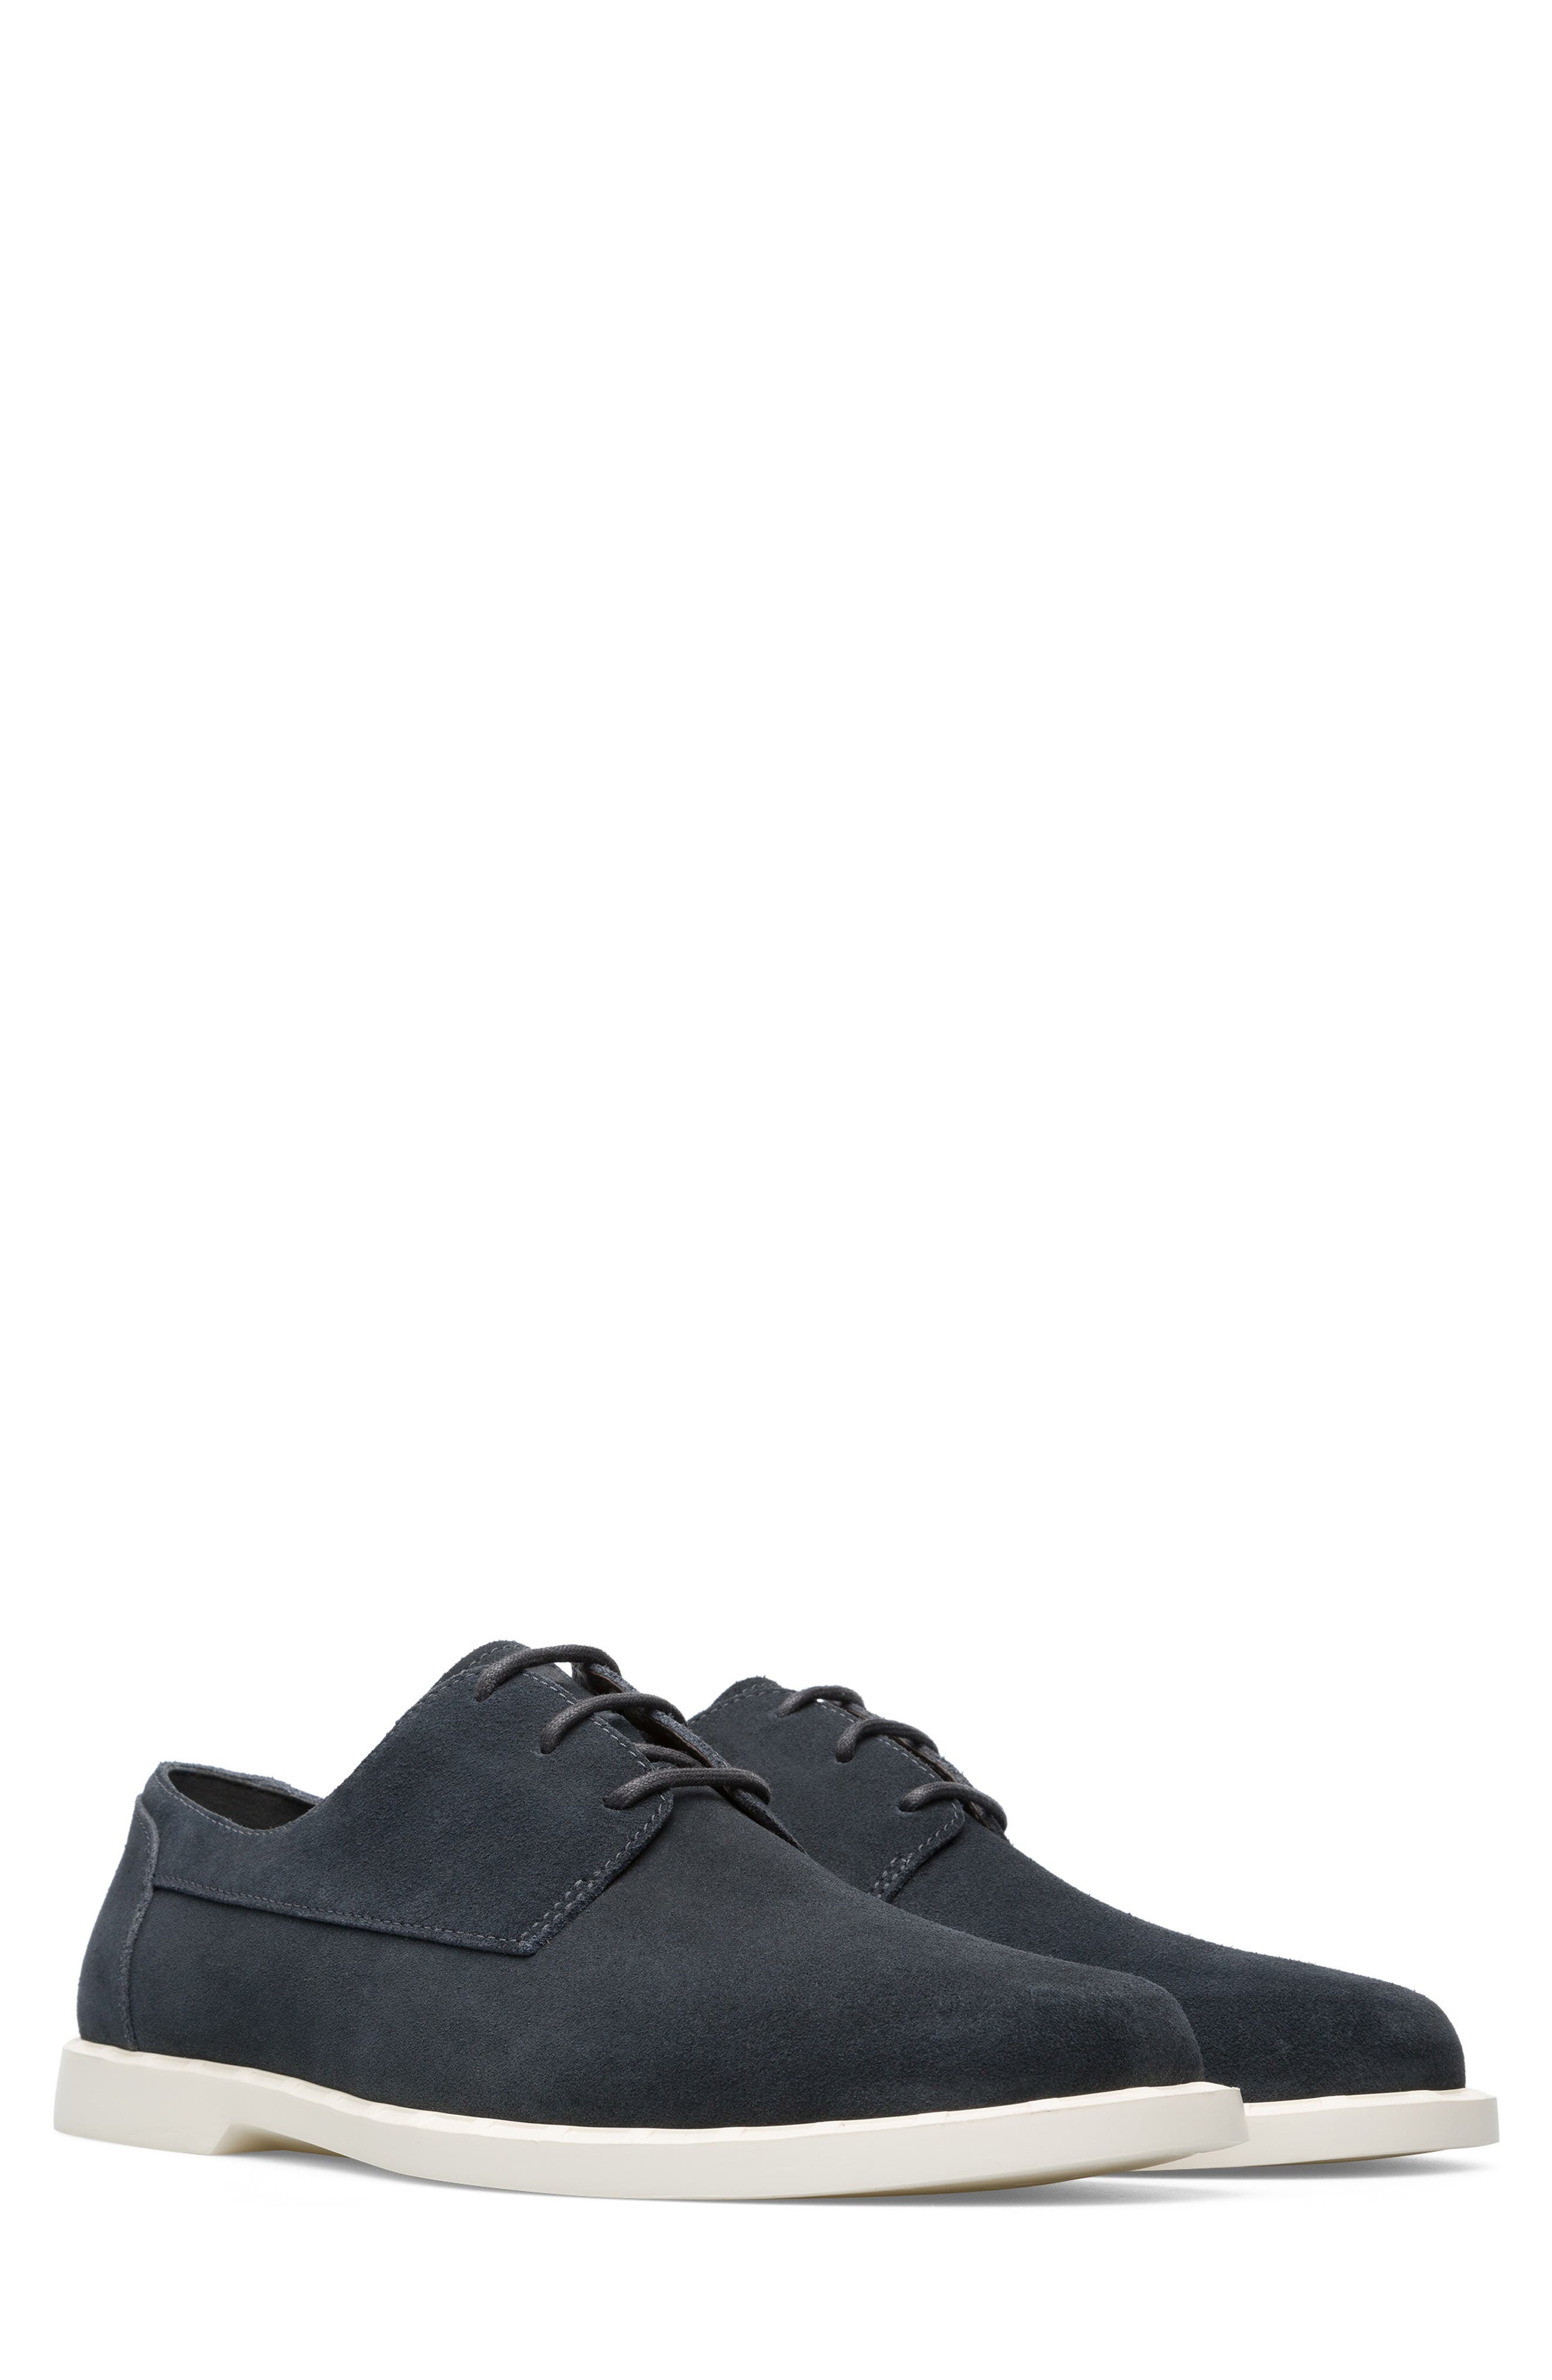 Camper Men's Judd Suede Derby Shoes In Charcoal